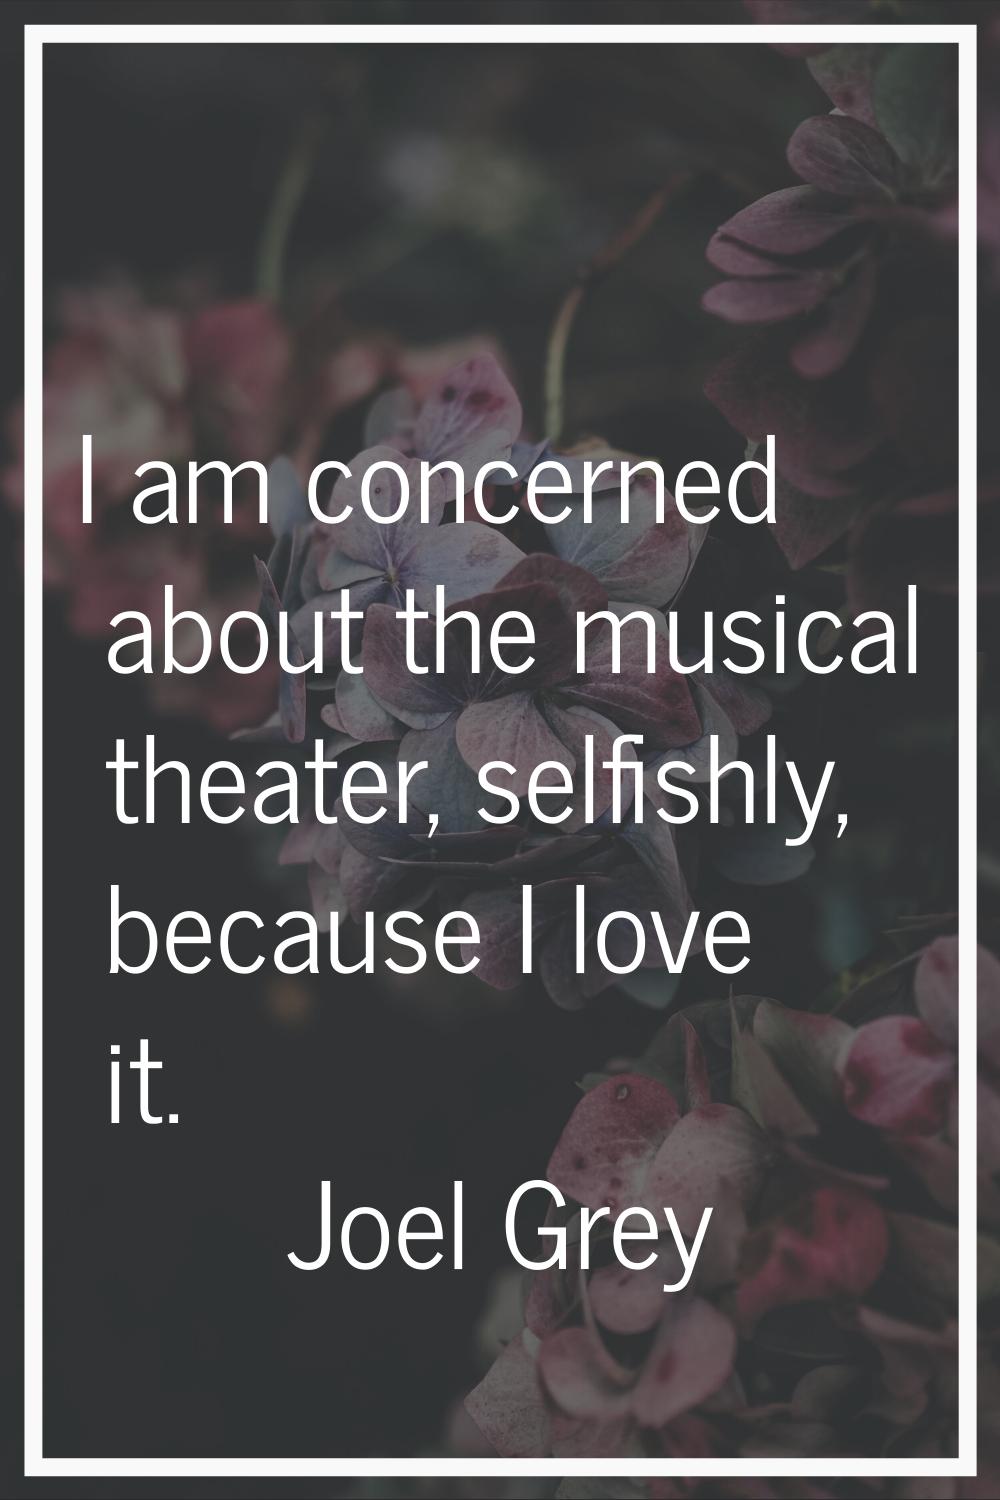 I am concerned about the musical theater, selfishly, because I love it.